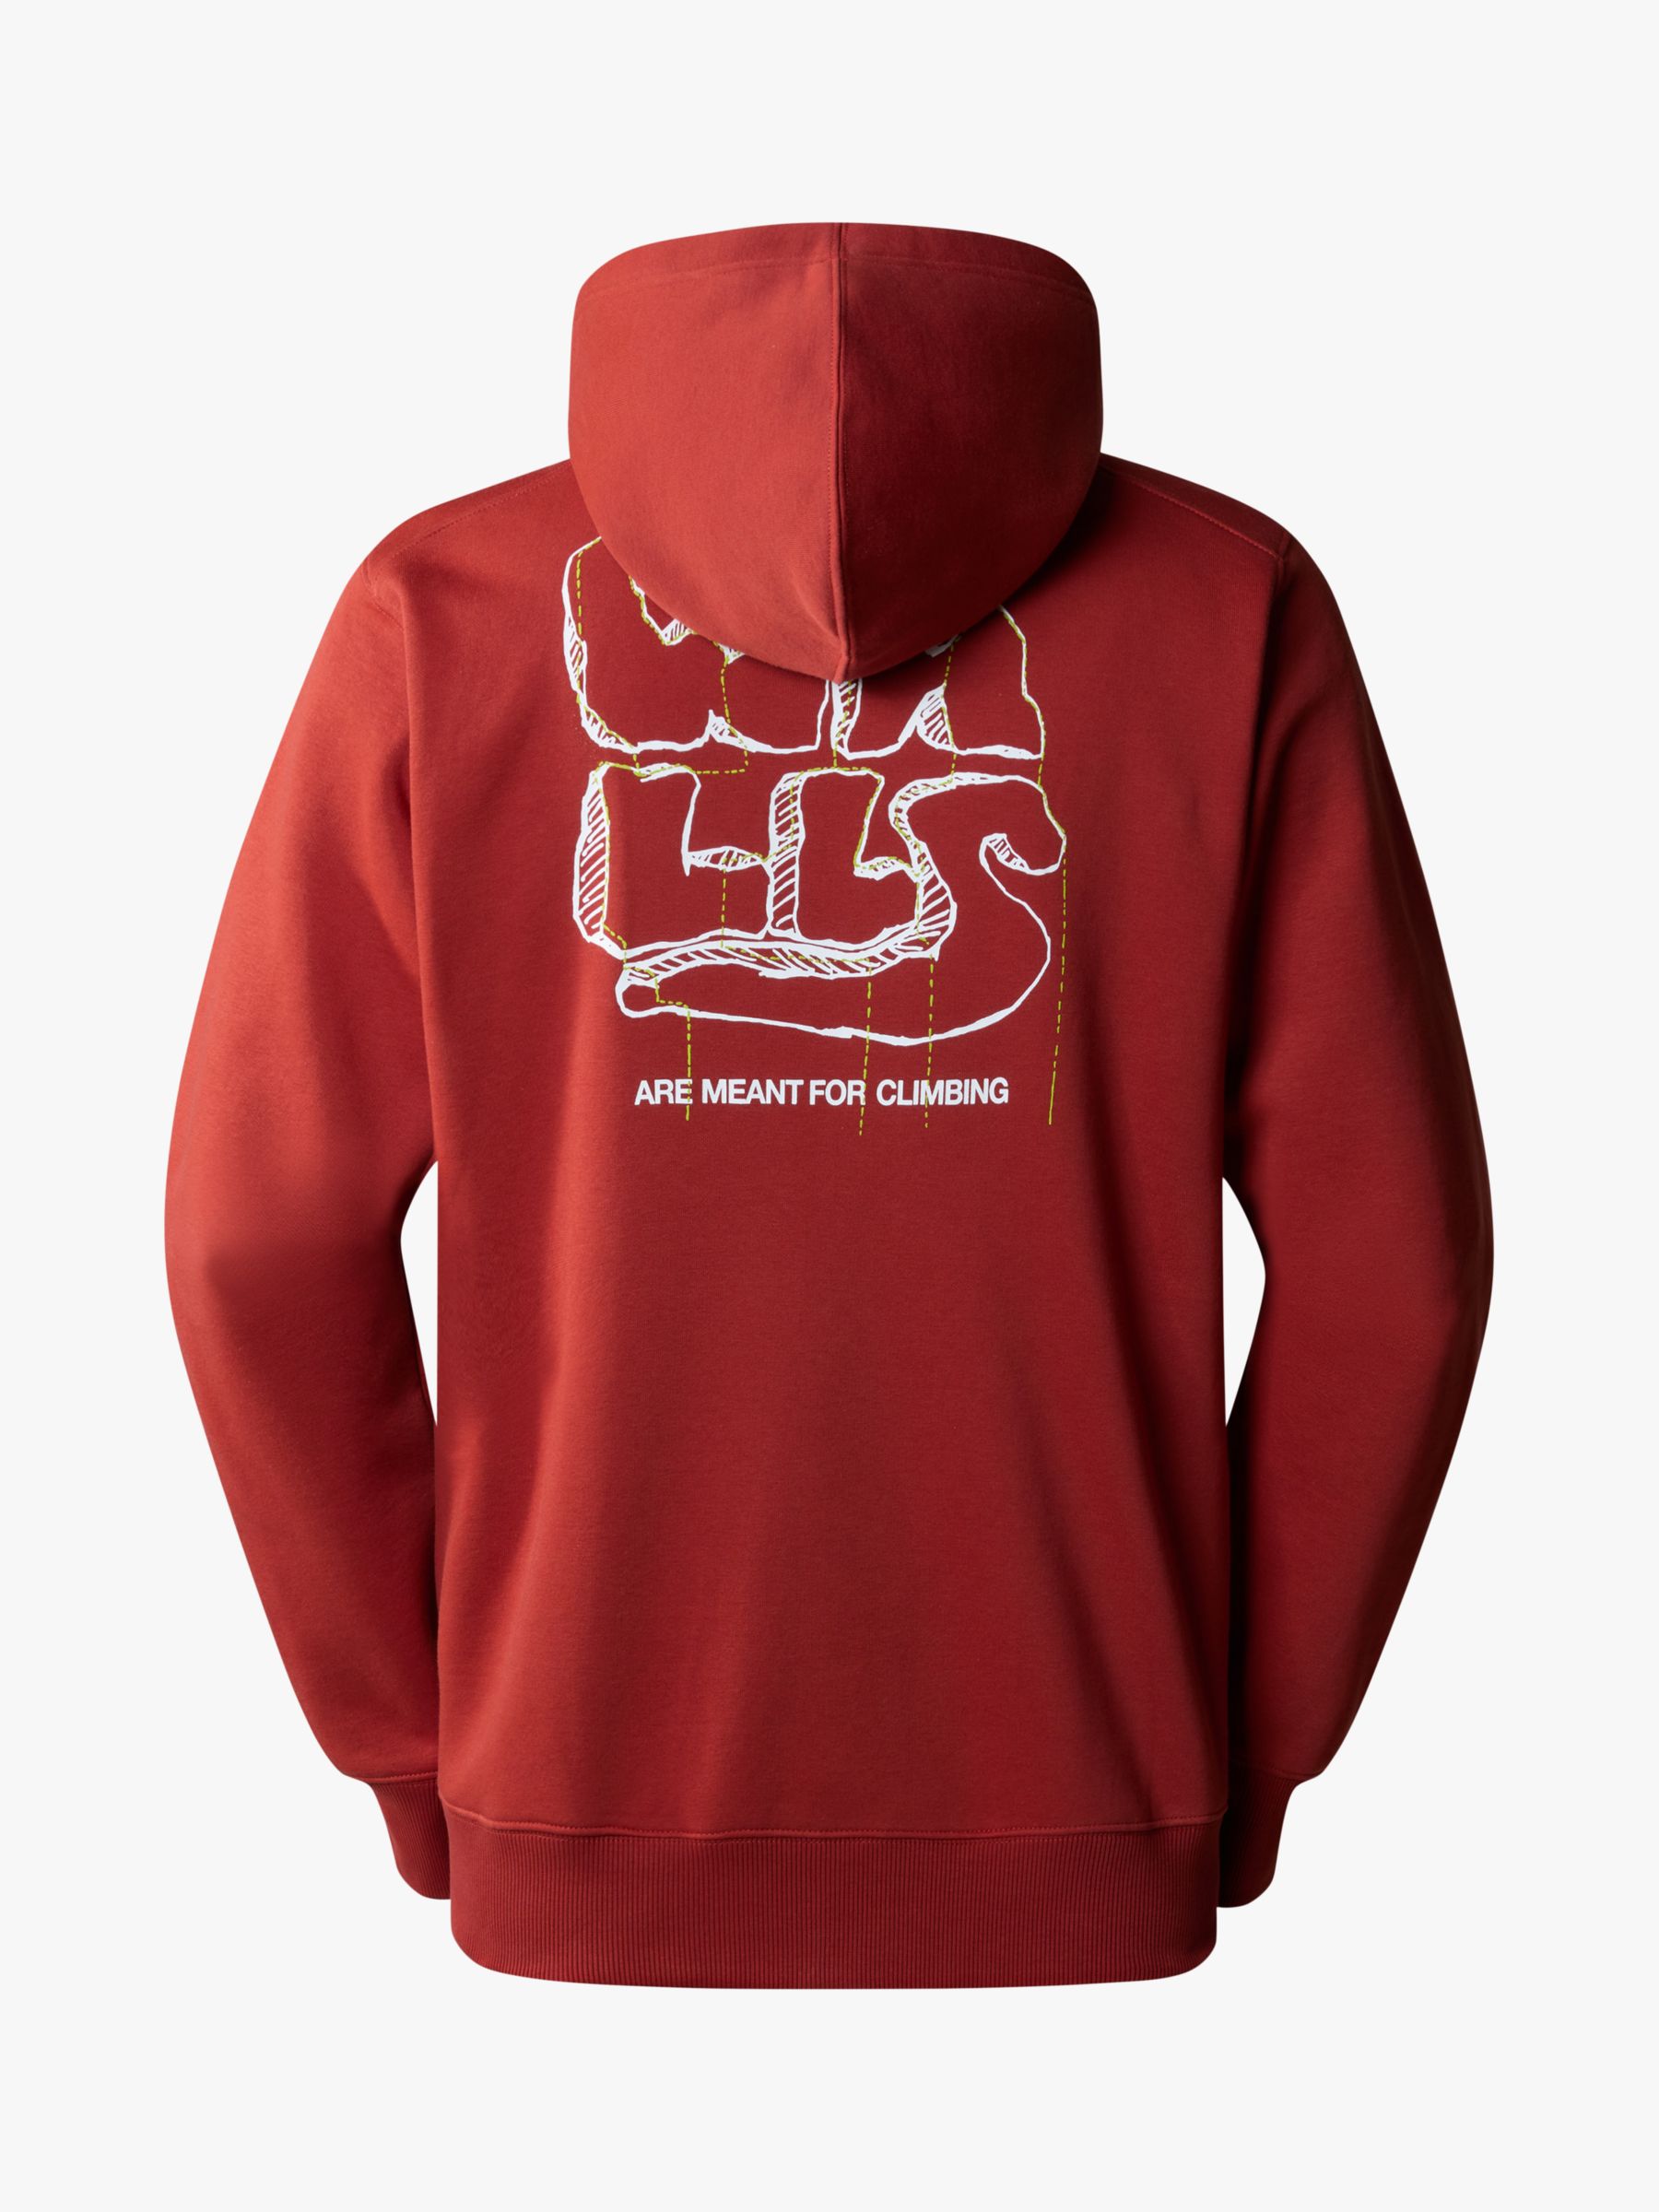 The North Face Back Graphic Hoodie, Iron Red, L